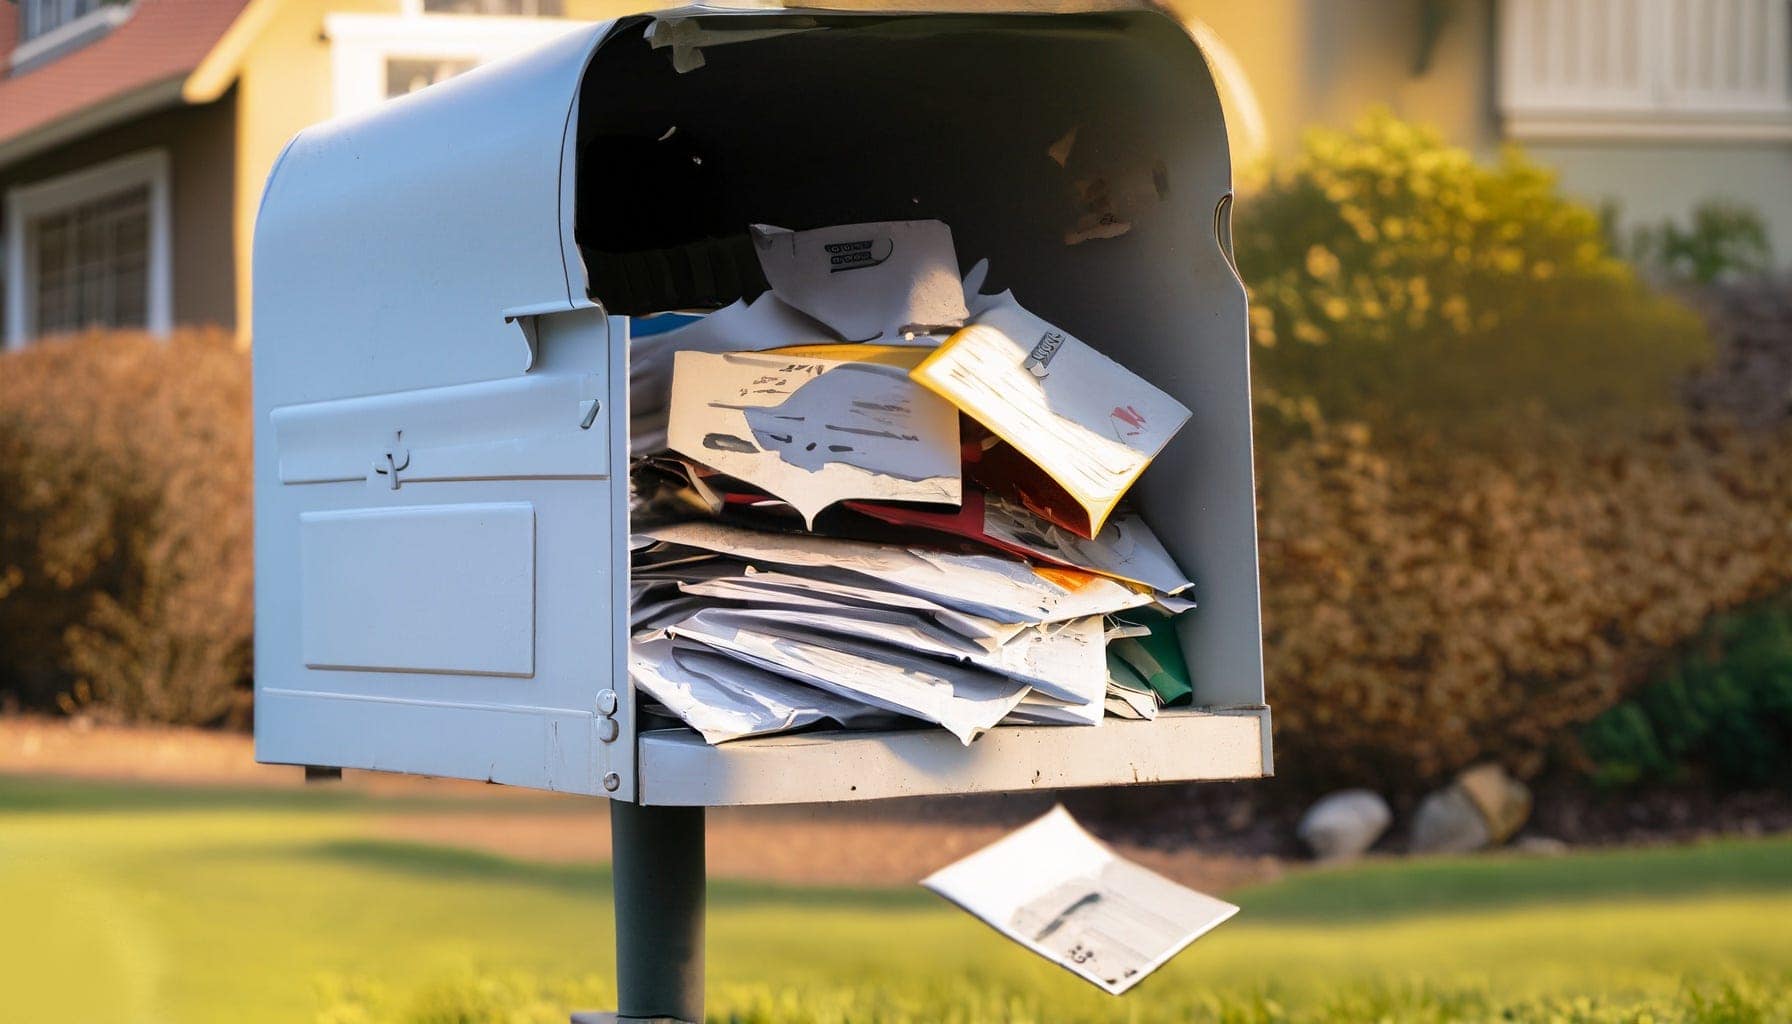 PaperKarma - "Mailbox in front of a house, overflowing with junk mail falling out” generated by A.I.